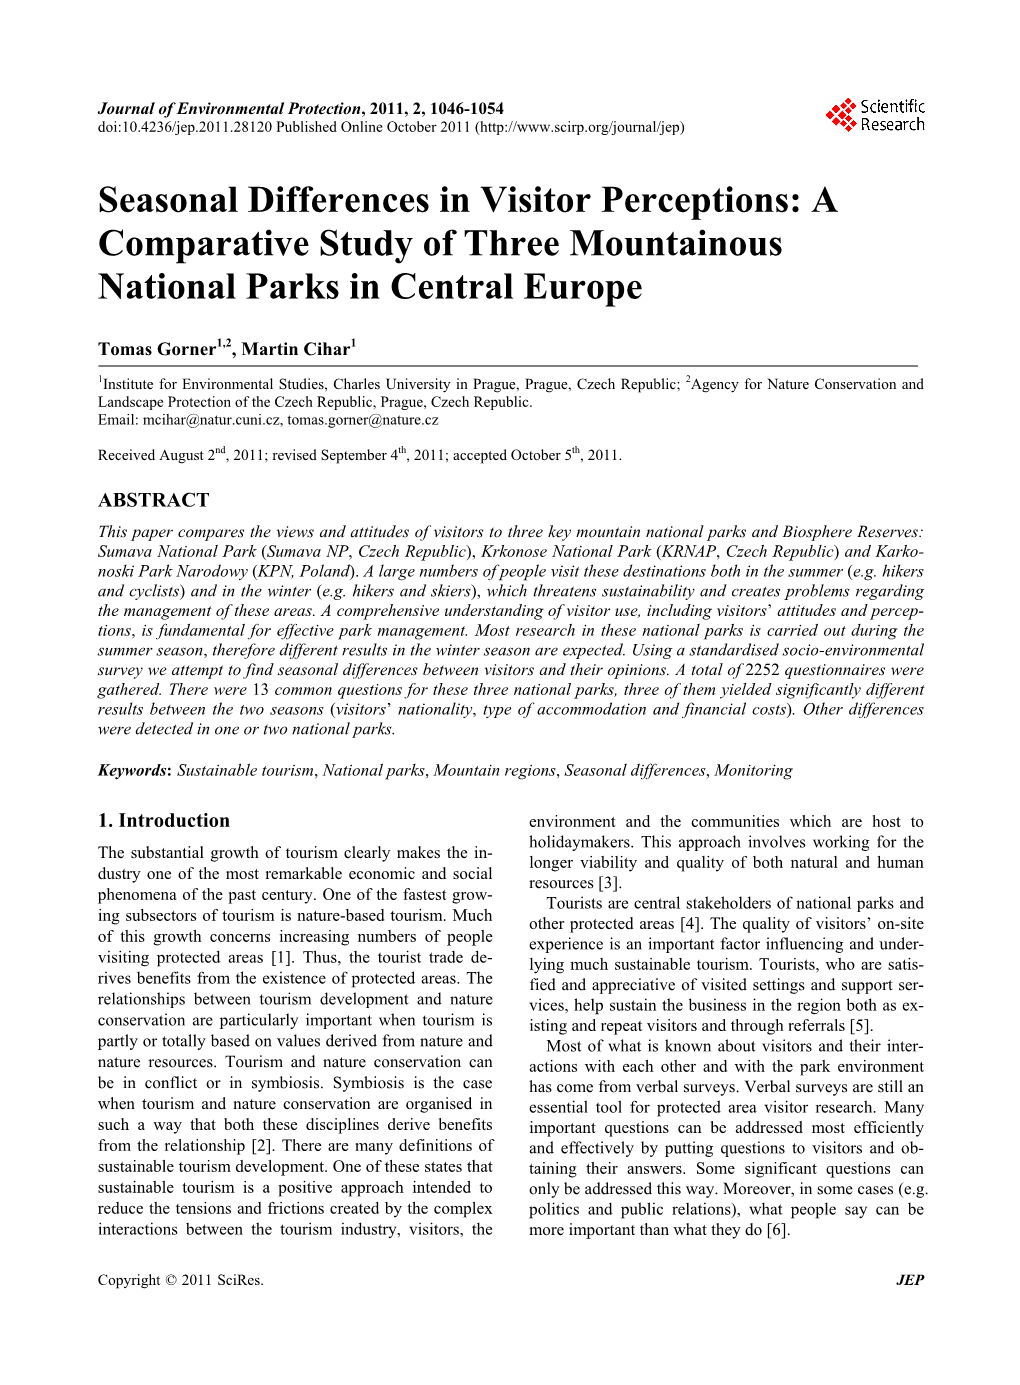 Seasonal Differences in Visitor Perceptions: a Comparative Study of Three Mountainous National Parks in Central Europe